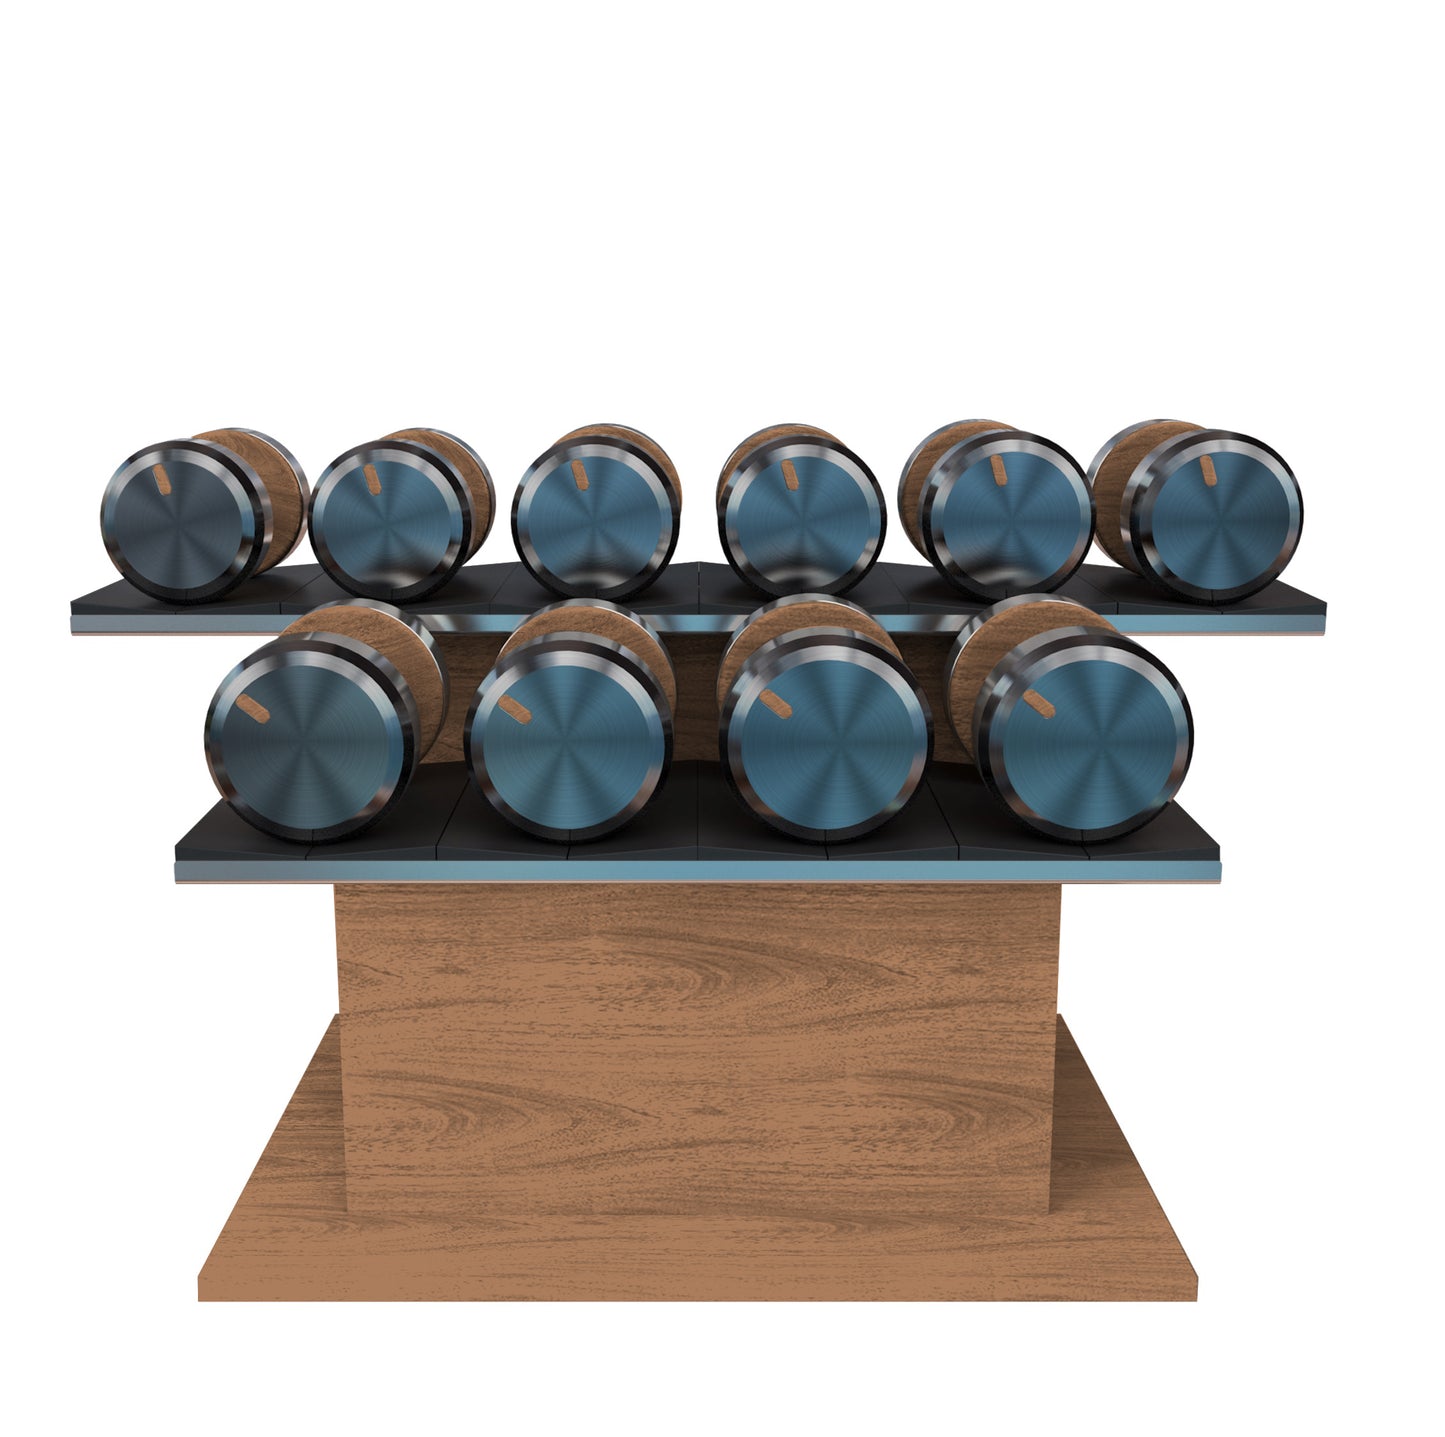 COLMIA Ultra Power Set - Dumbbells on a Horizontal Wooden Stand